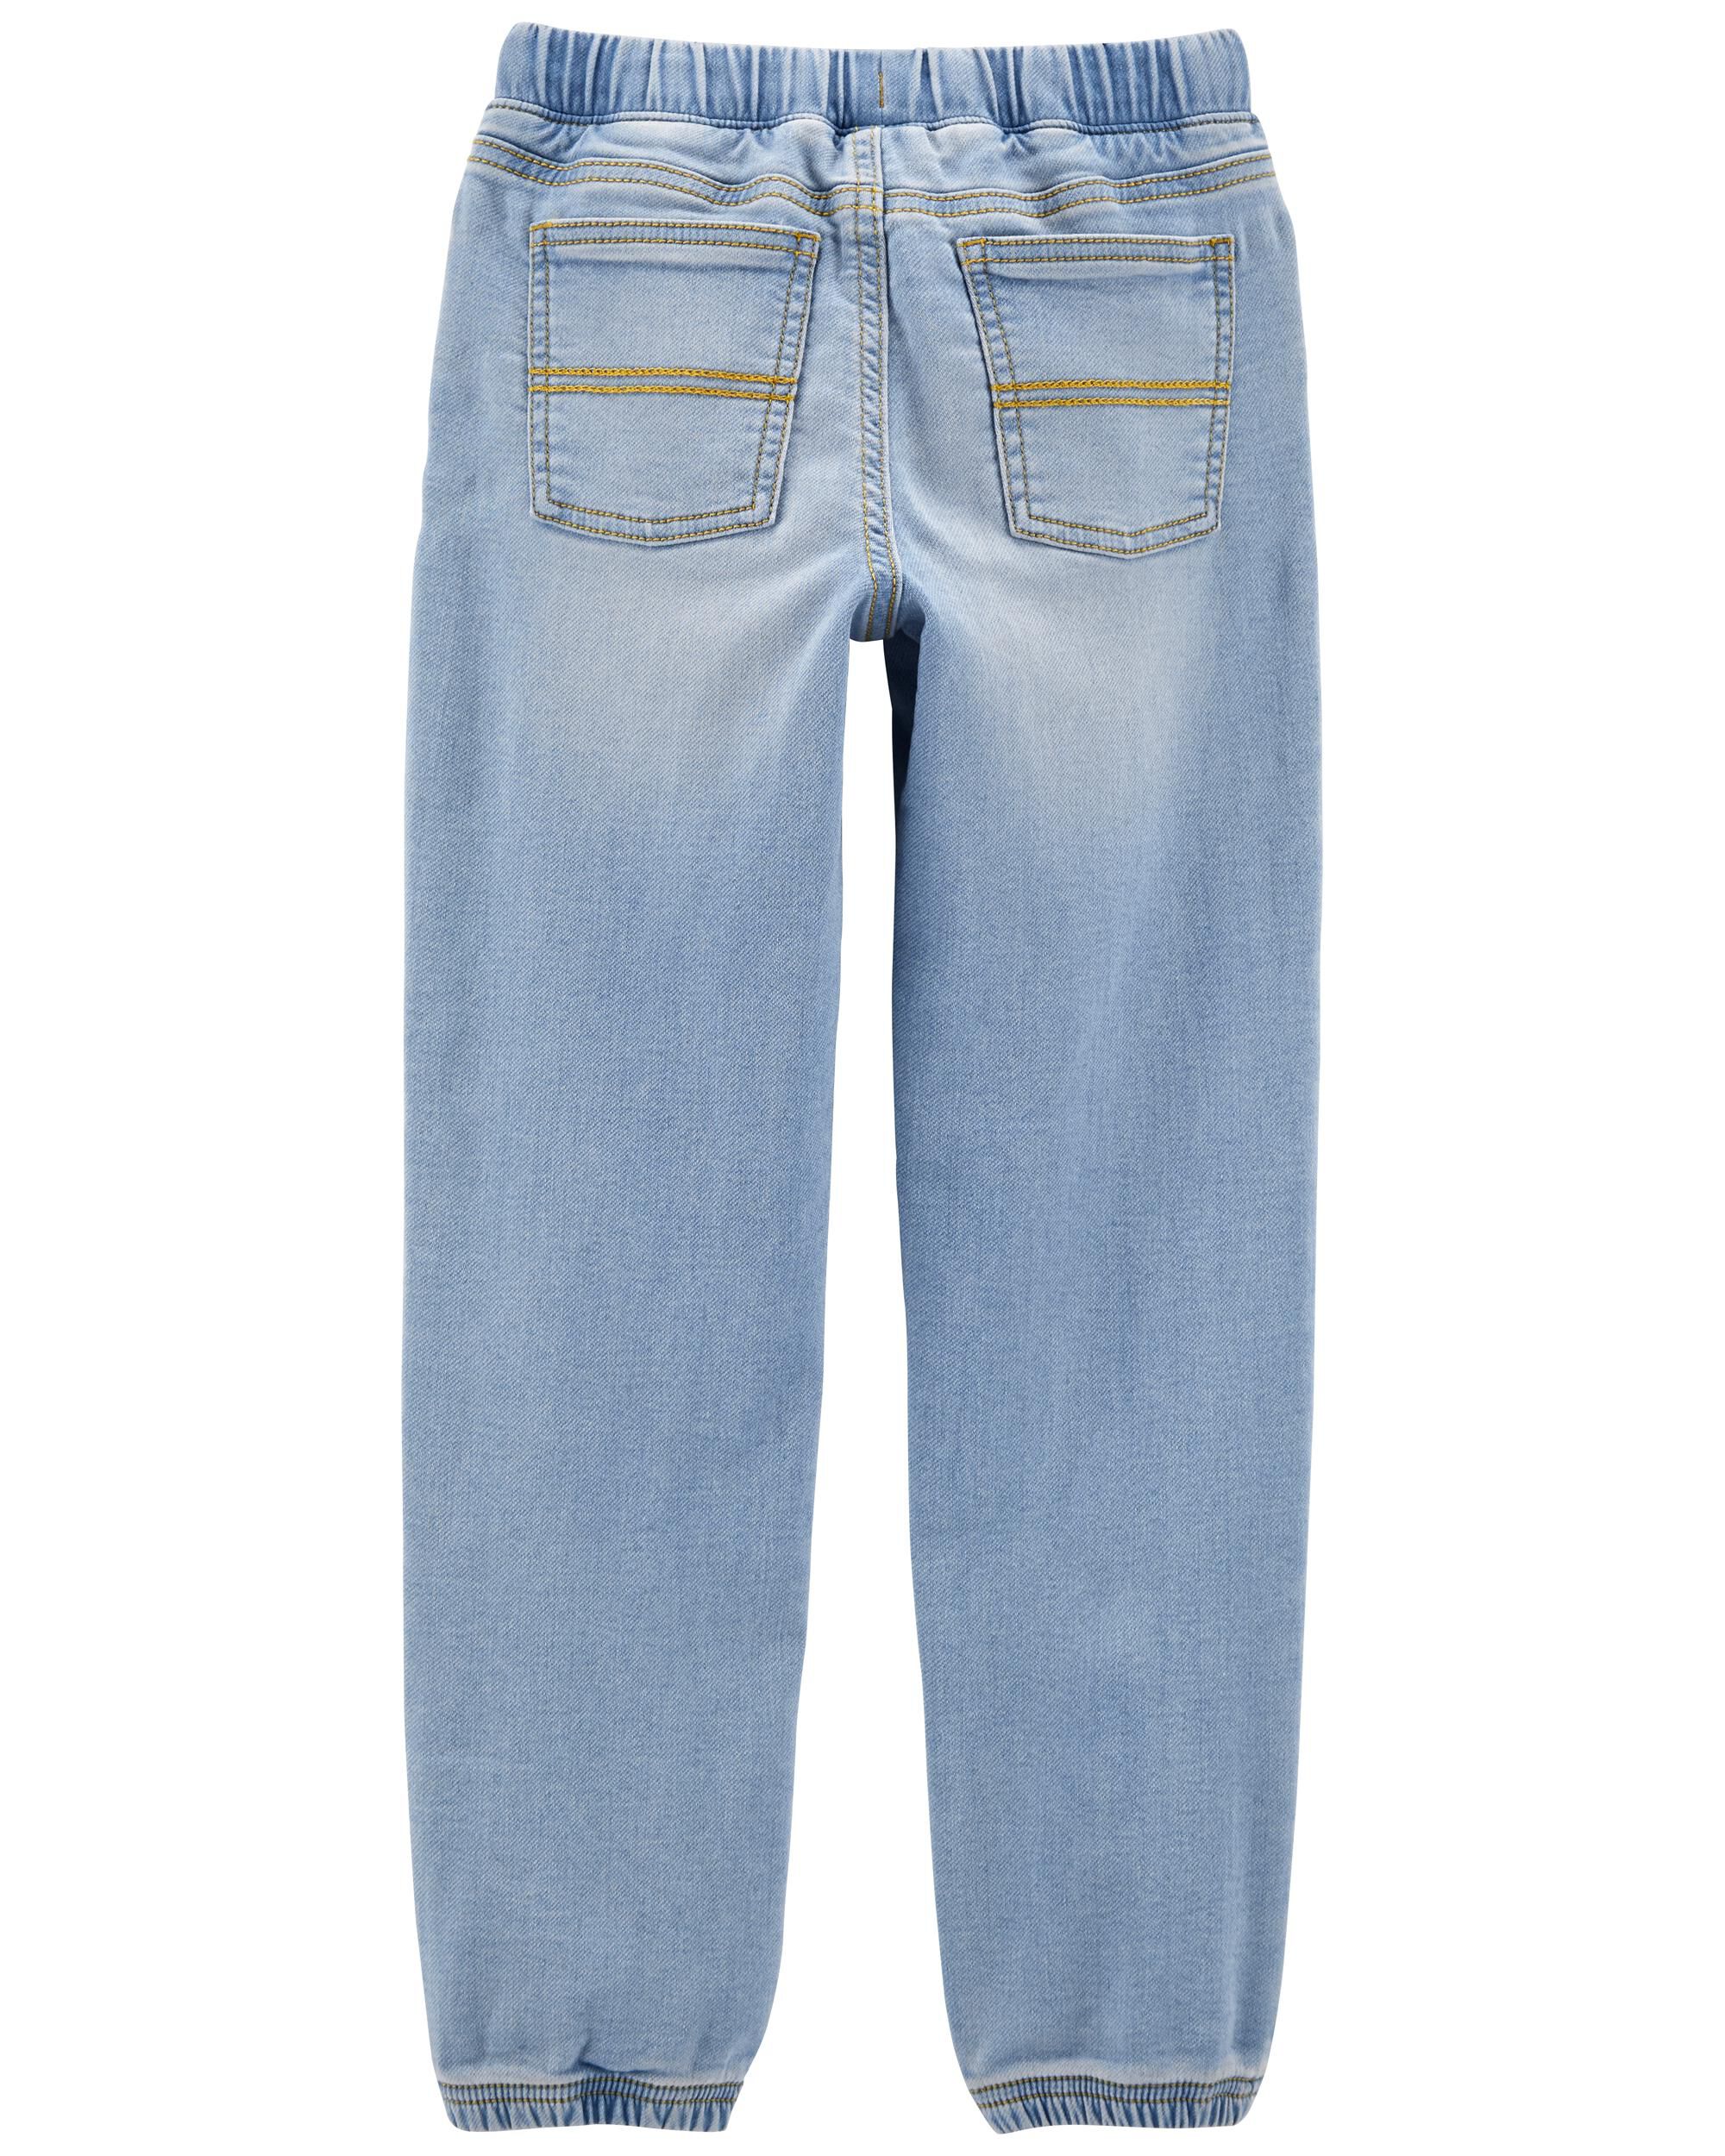 Pull on Flare Jeans - Oopsie Daisy